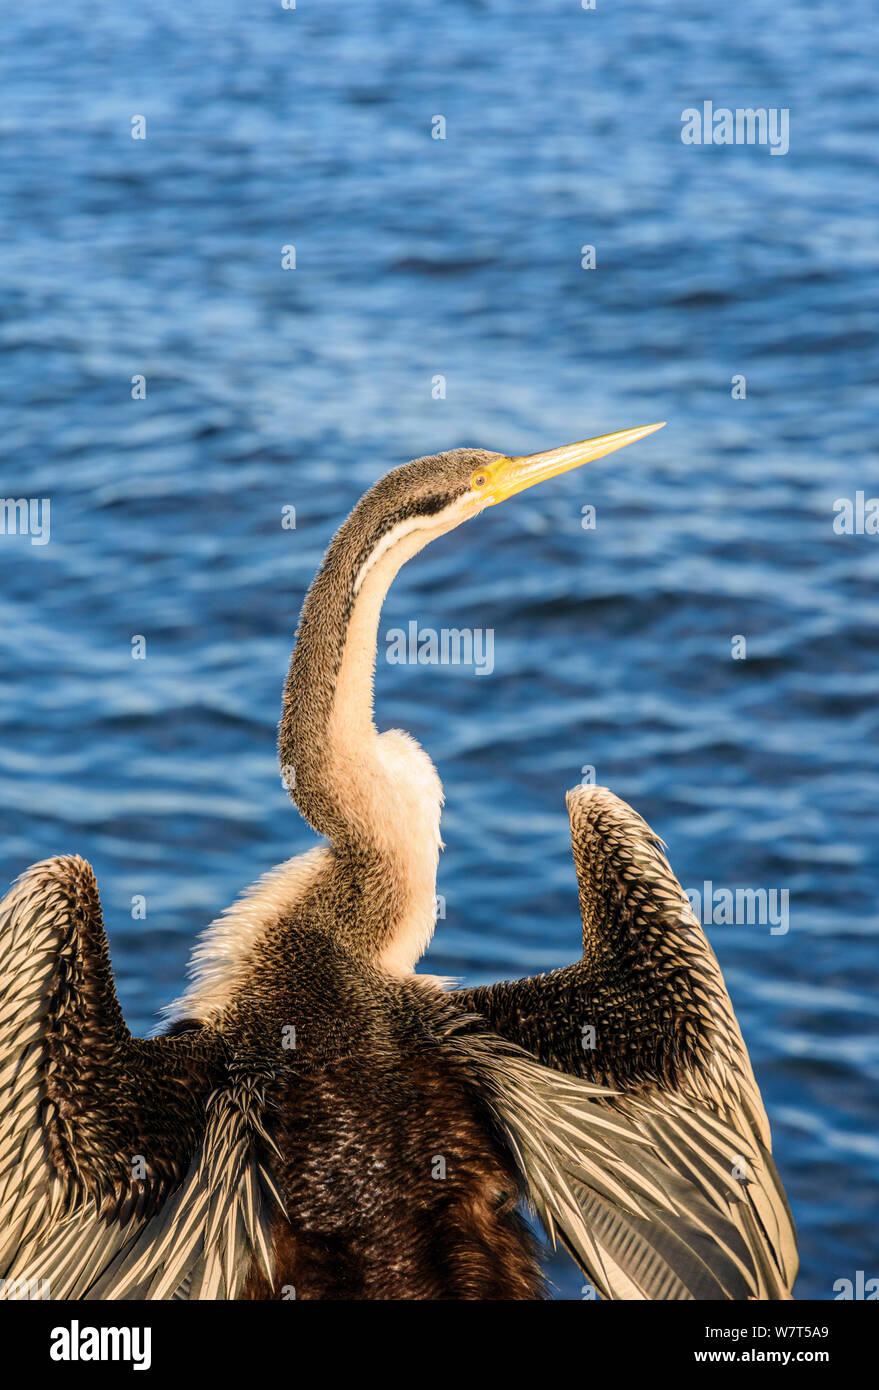 Australasian darter water bird drying its wings in the sun on the banks of the Swan River, Perth, Western Australia Stock Photo